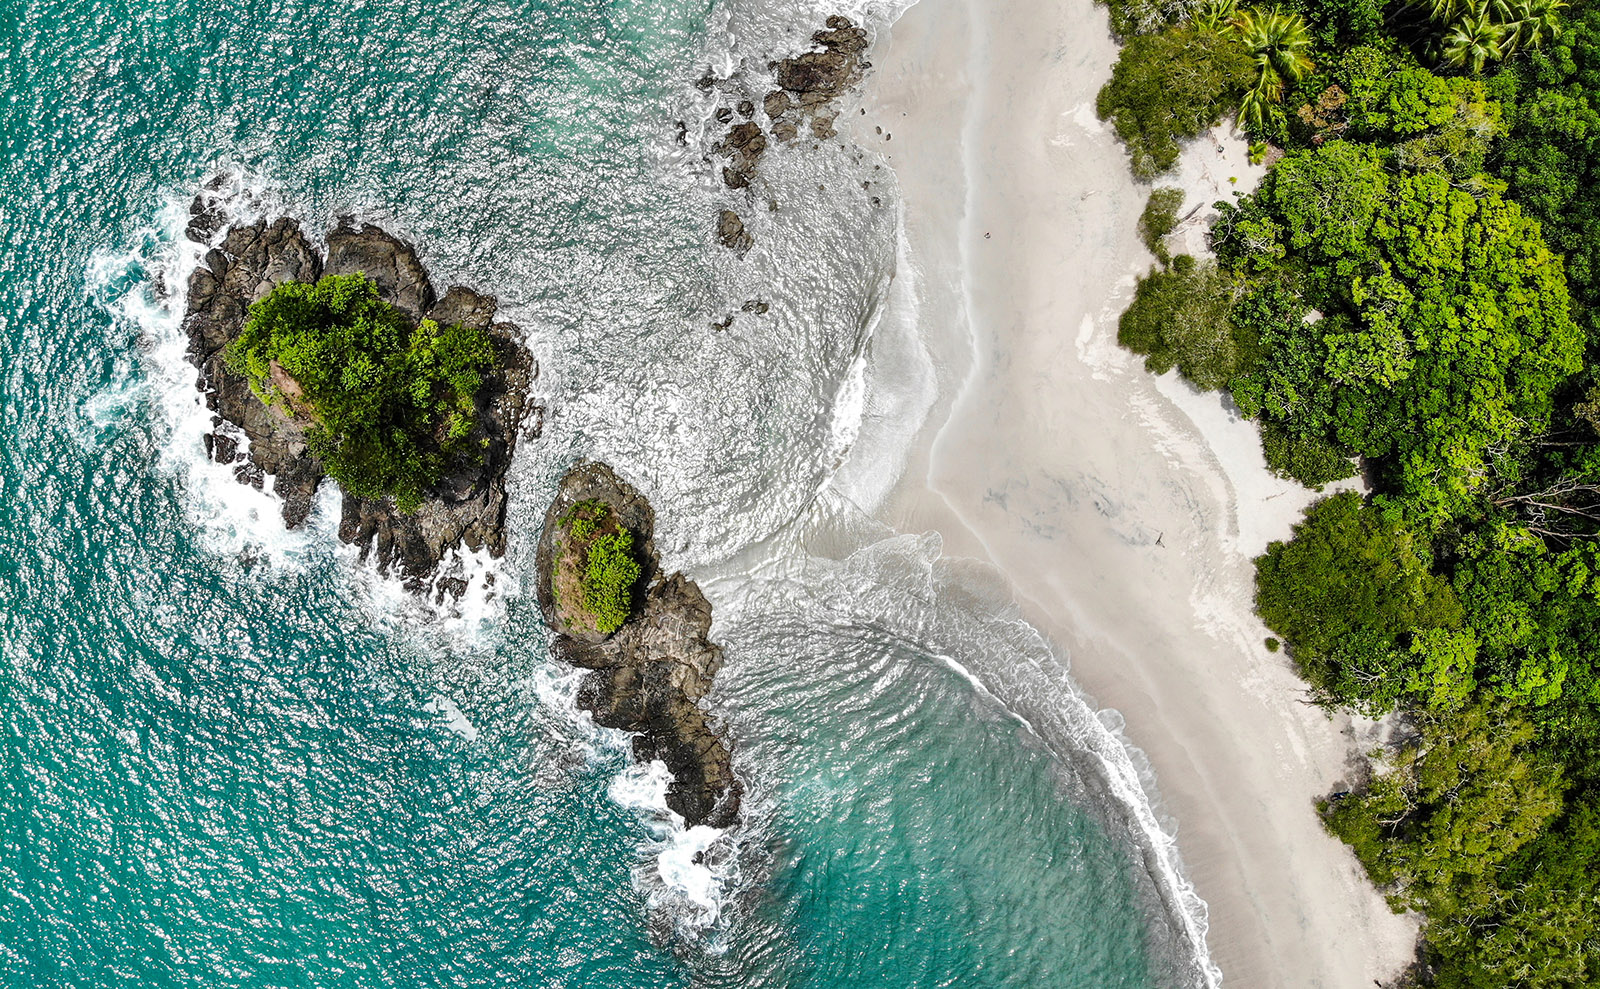 5 Great Books Set in Costa Rica That We Love